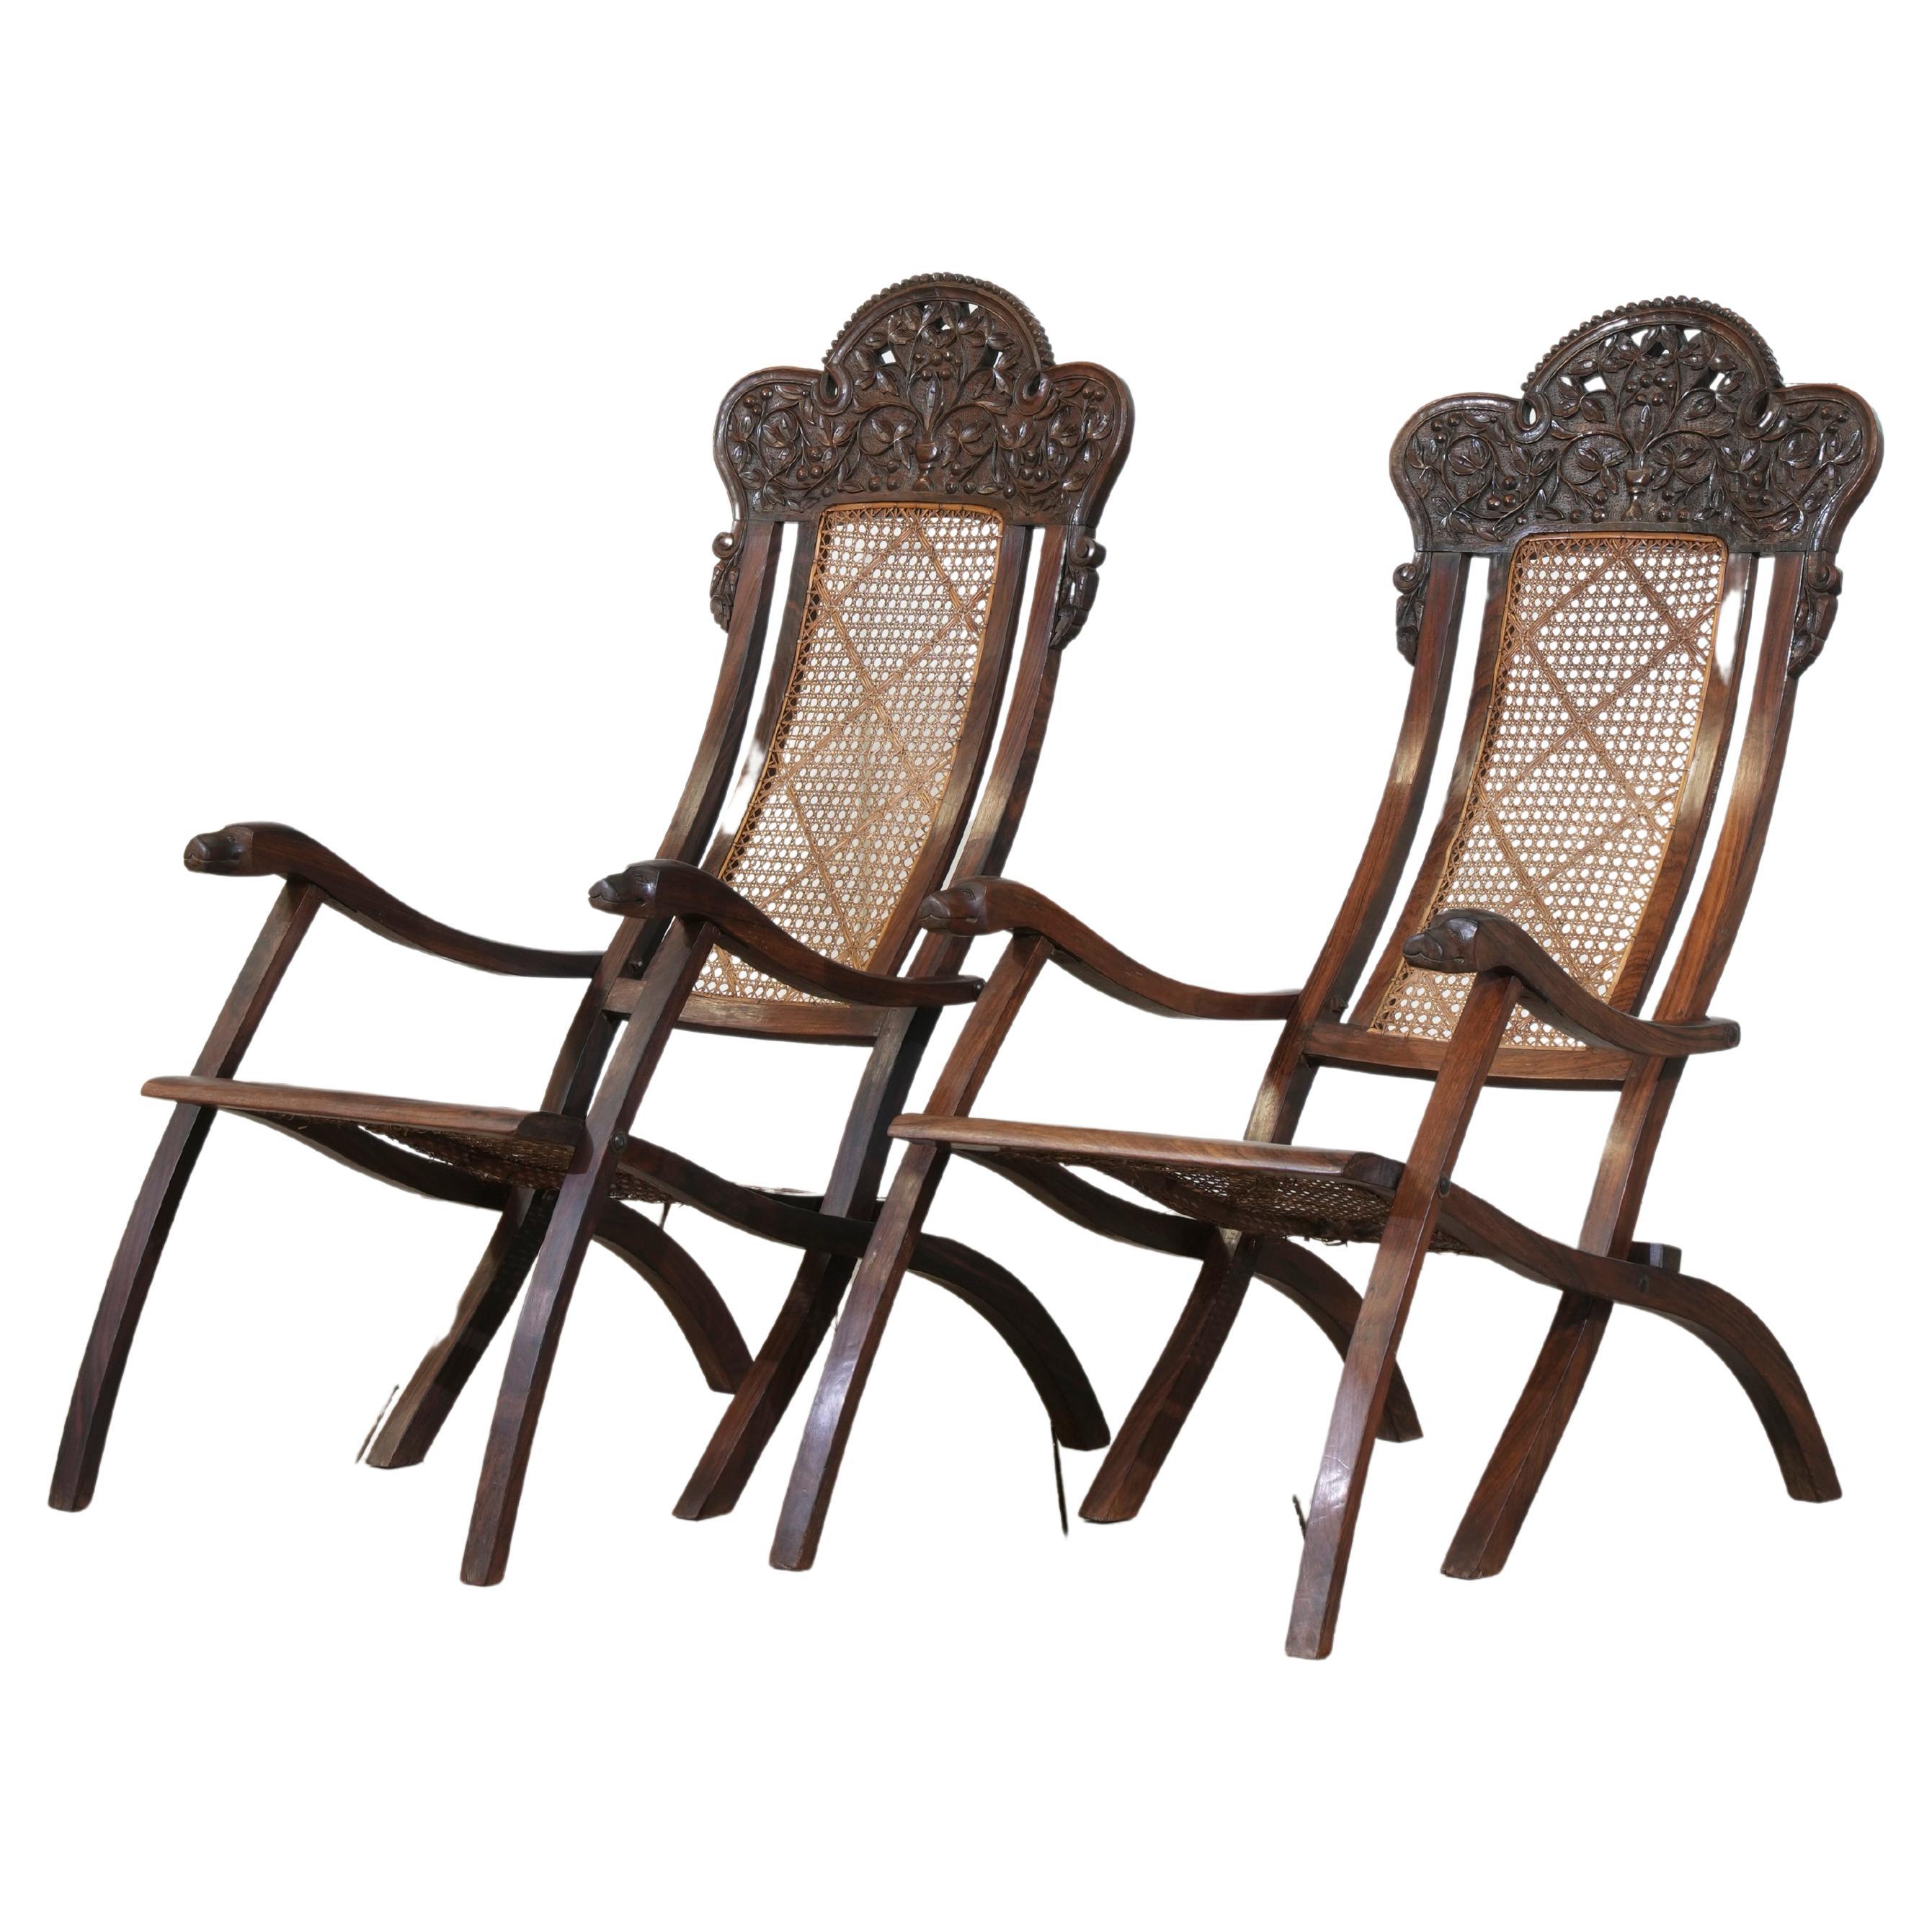 Pair of Indian Caned Mahogany Folding Conservatory Chairs